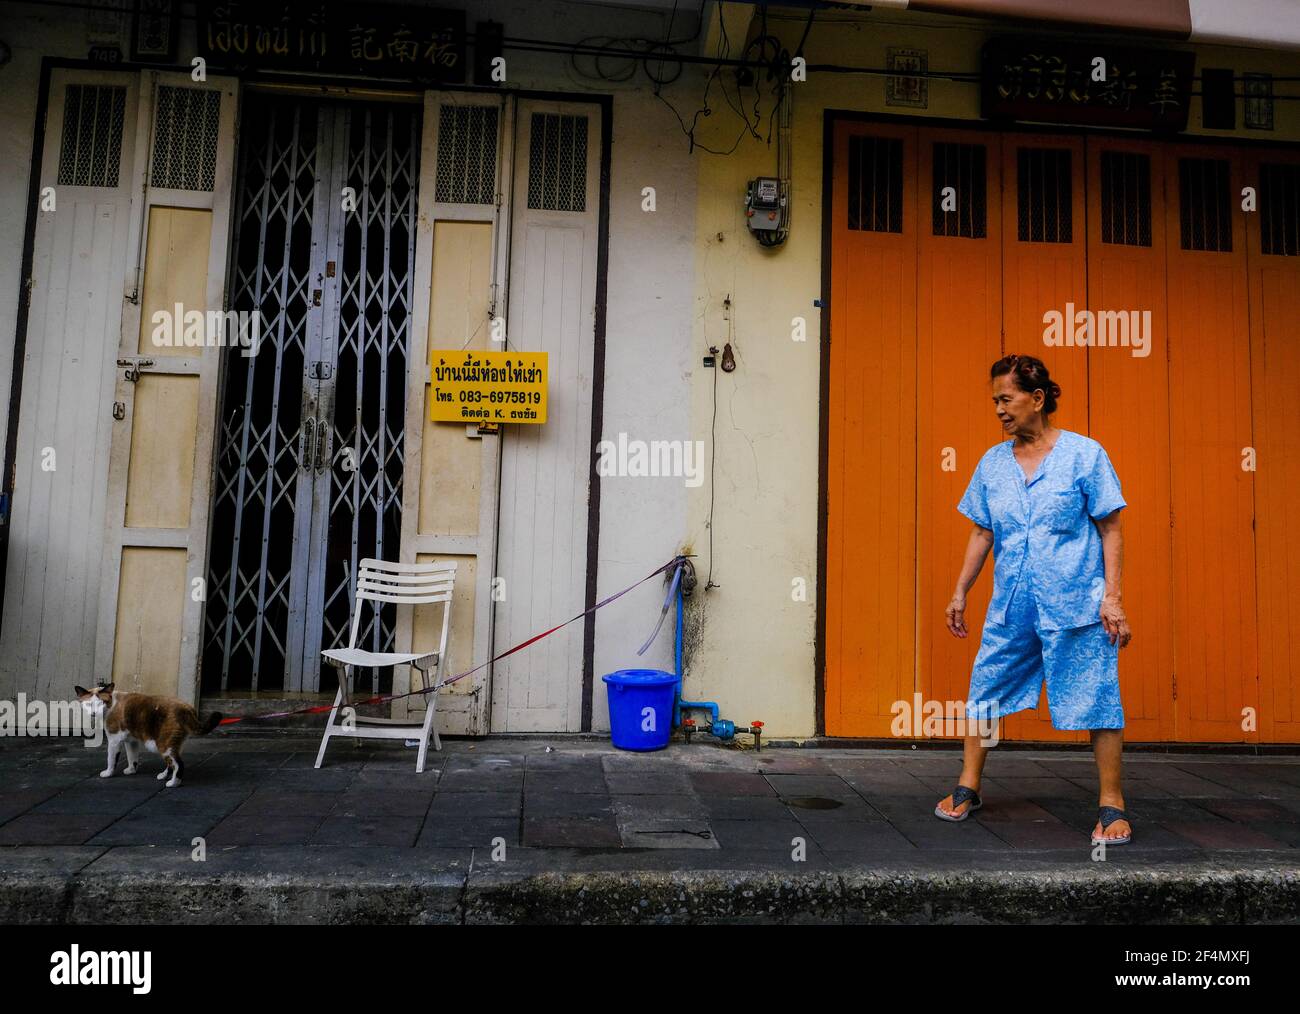 An elderly woman takes her cat out for a walk in the Chinatown area of Bangkok, Thailand Stock Photo